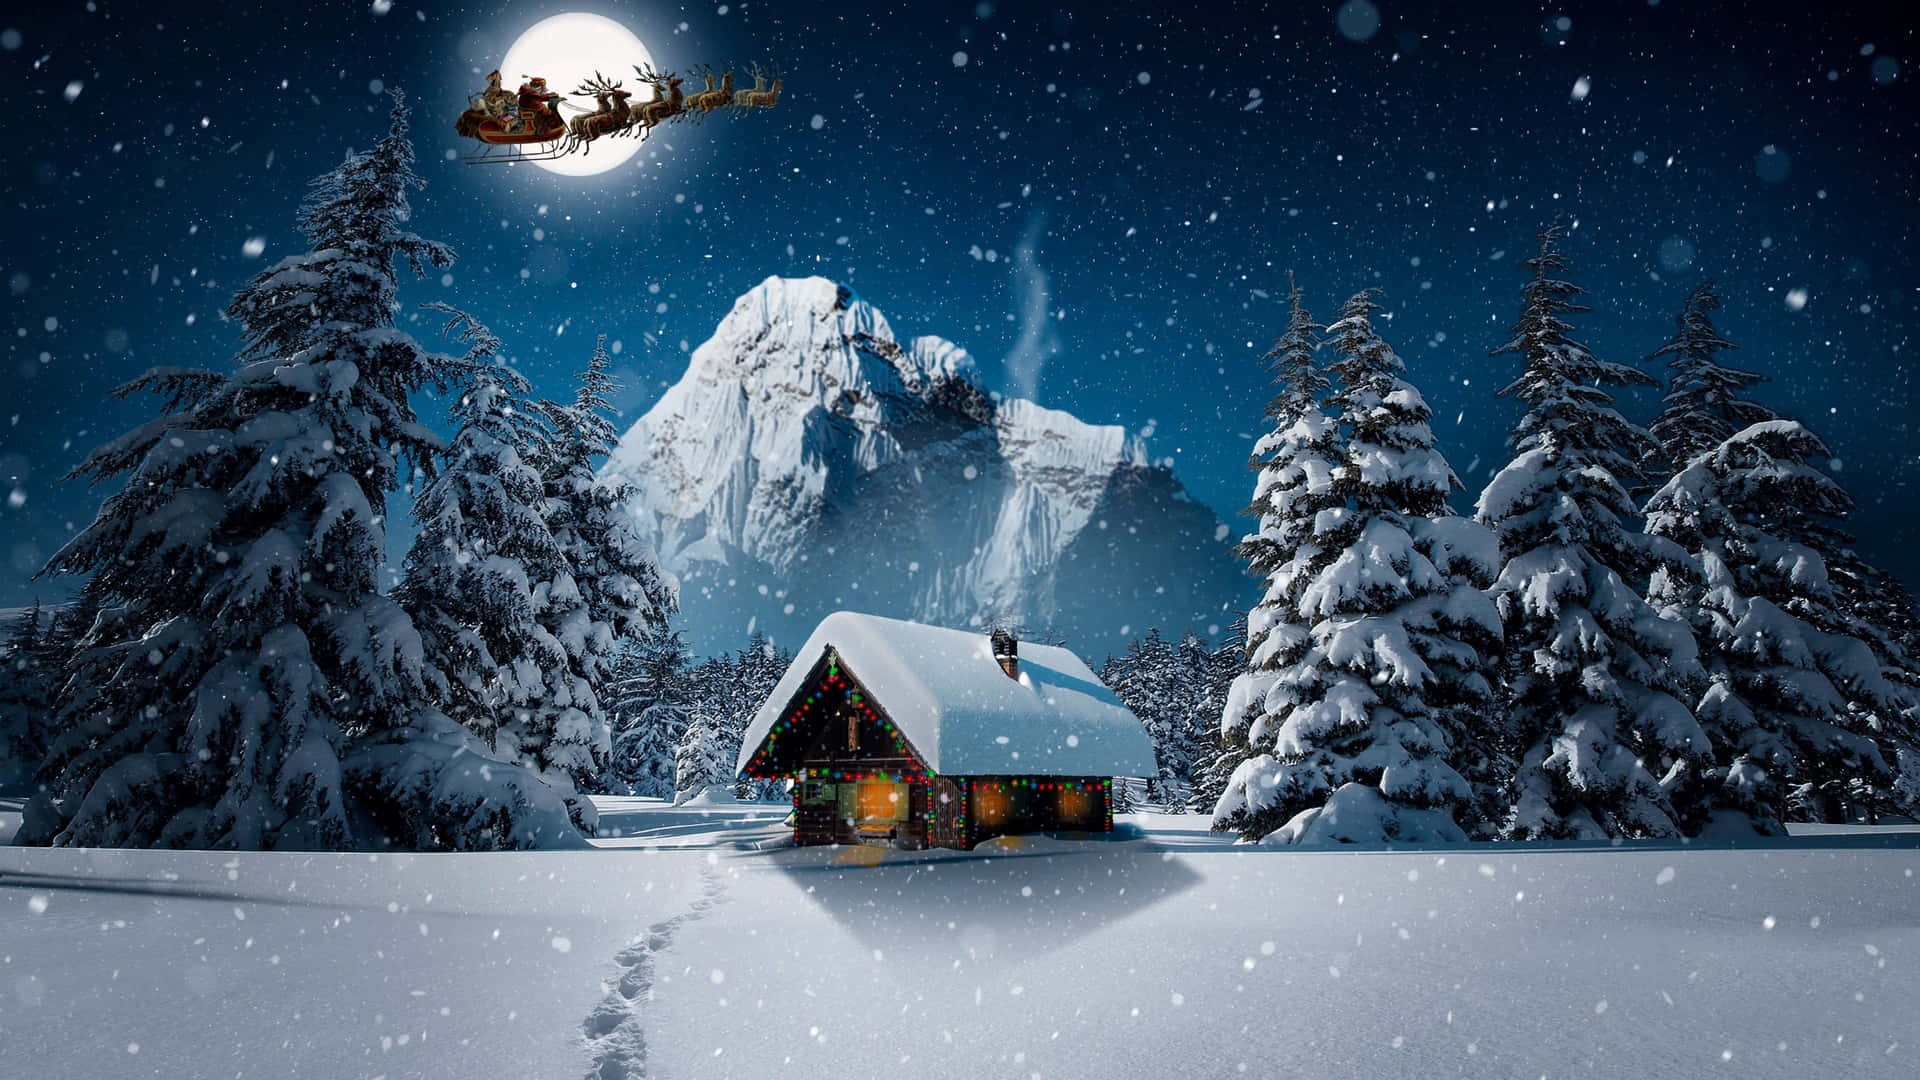 Digital Art Cool Christmas Cabin And Santa Claus Background